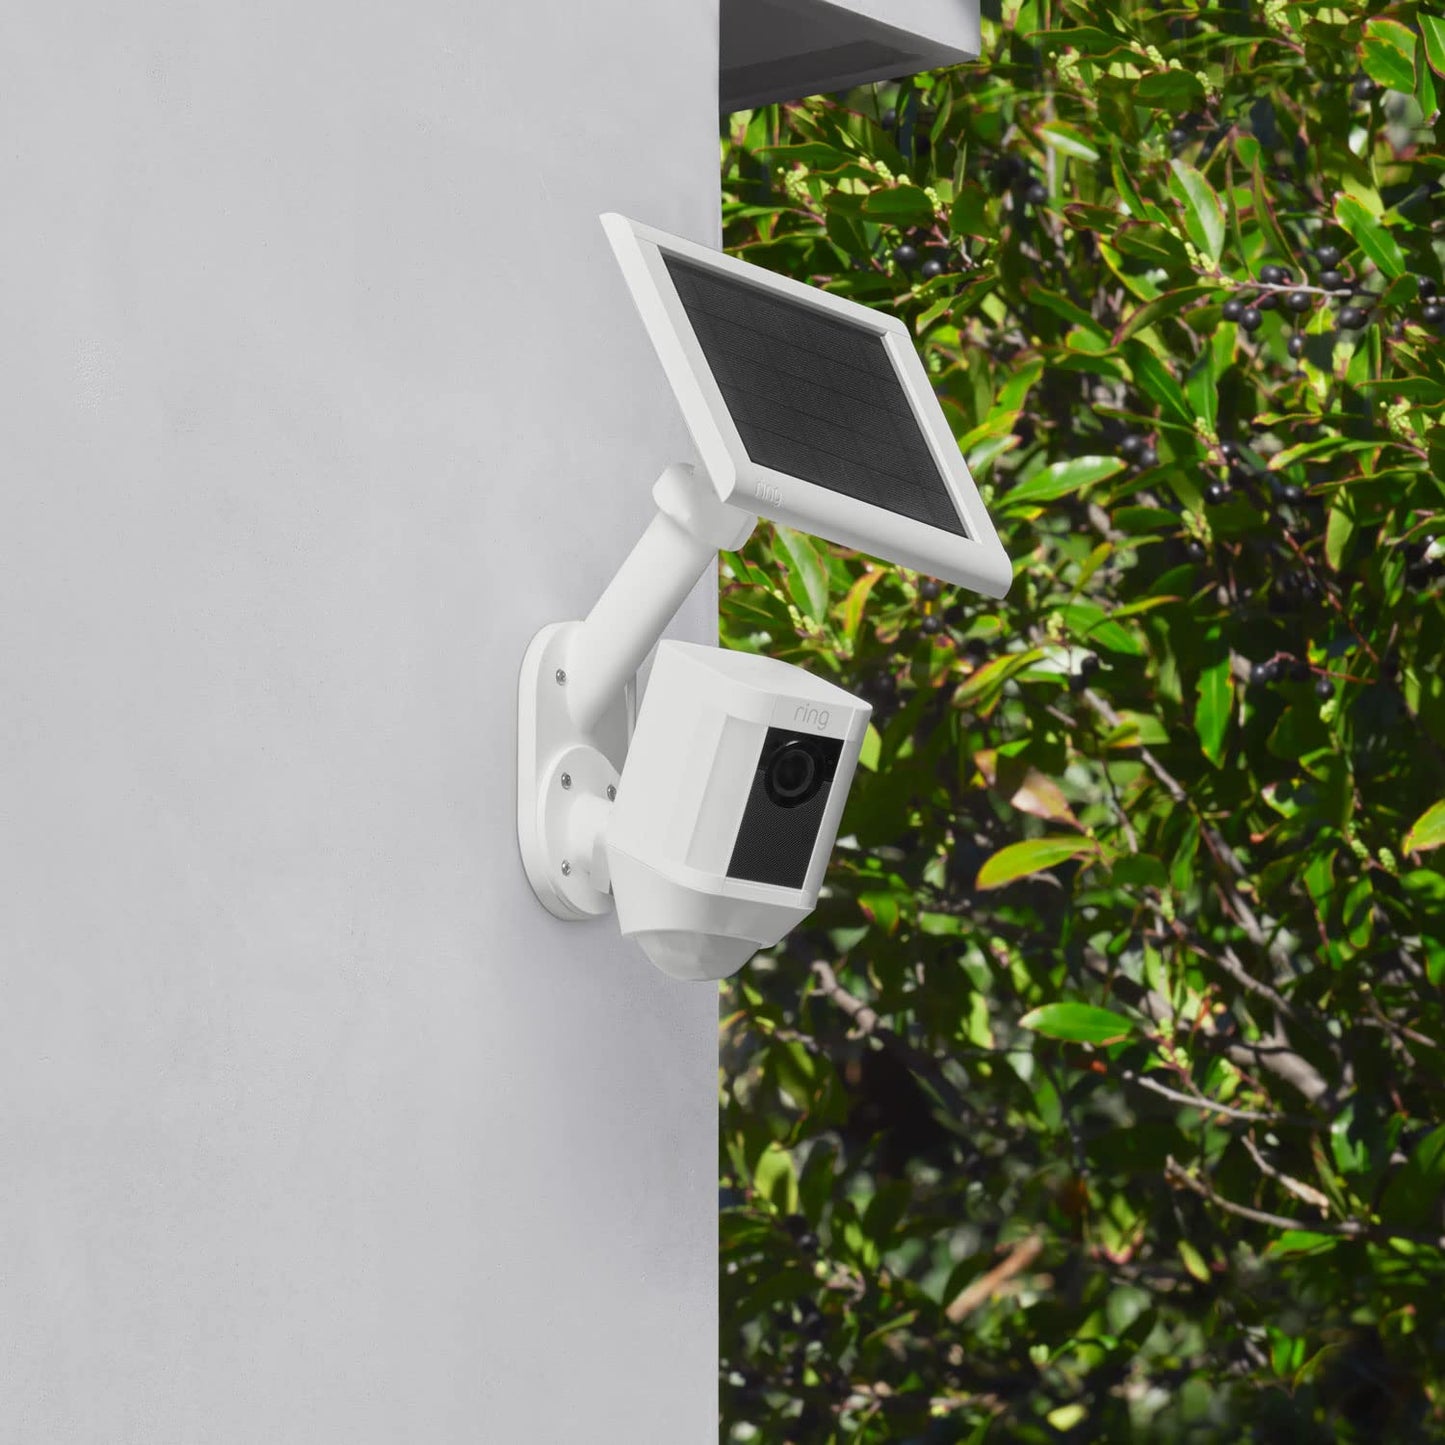 Wall Mount Made For Rng Stick Up Camera Spotlight Cam and Solar Panels White